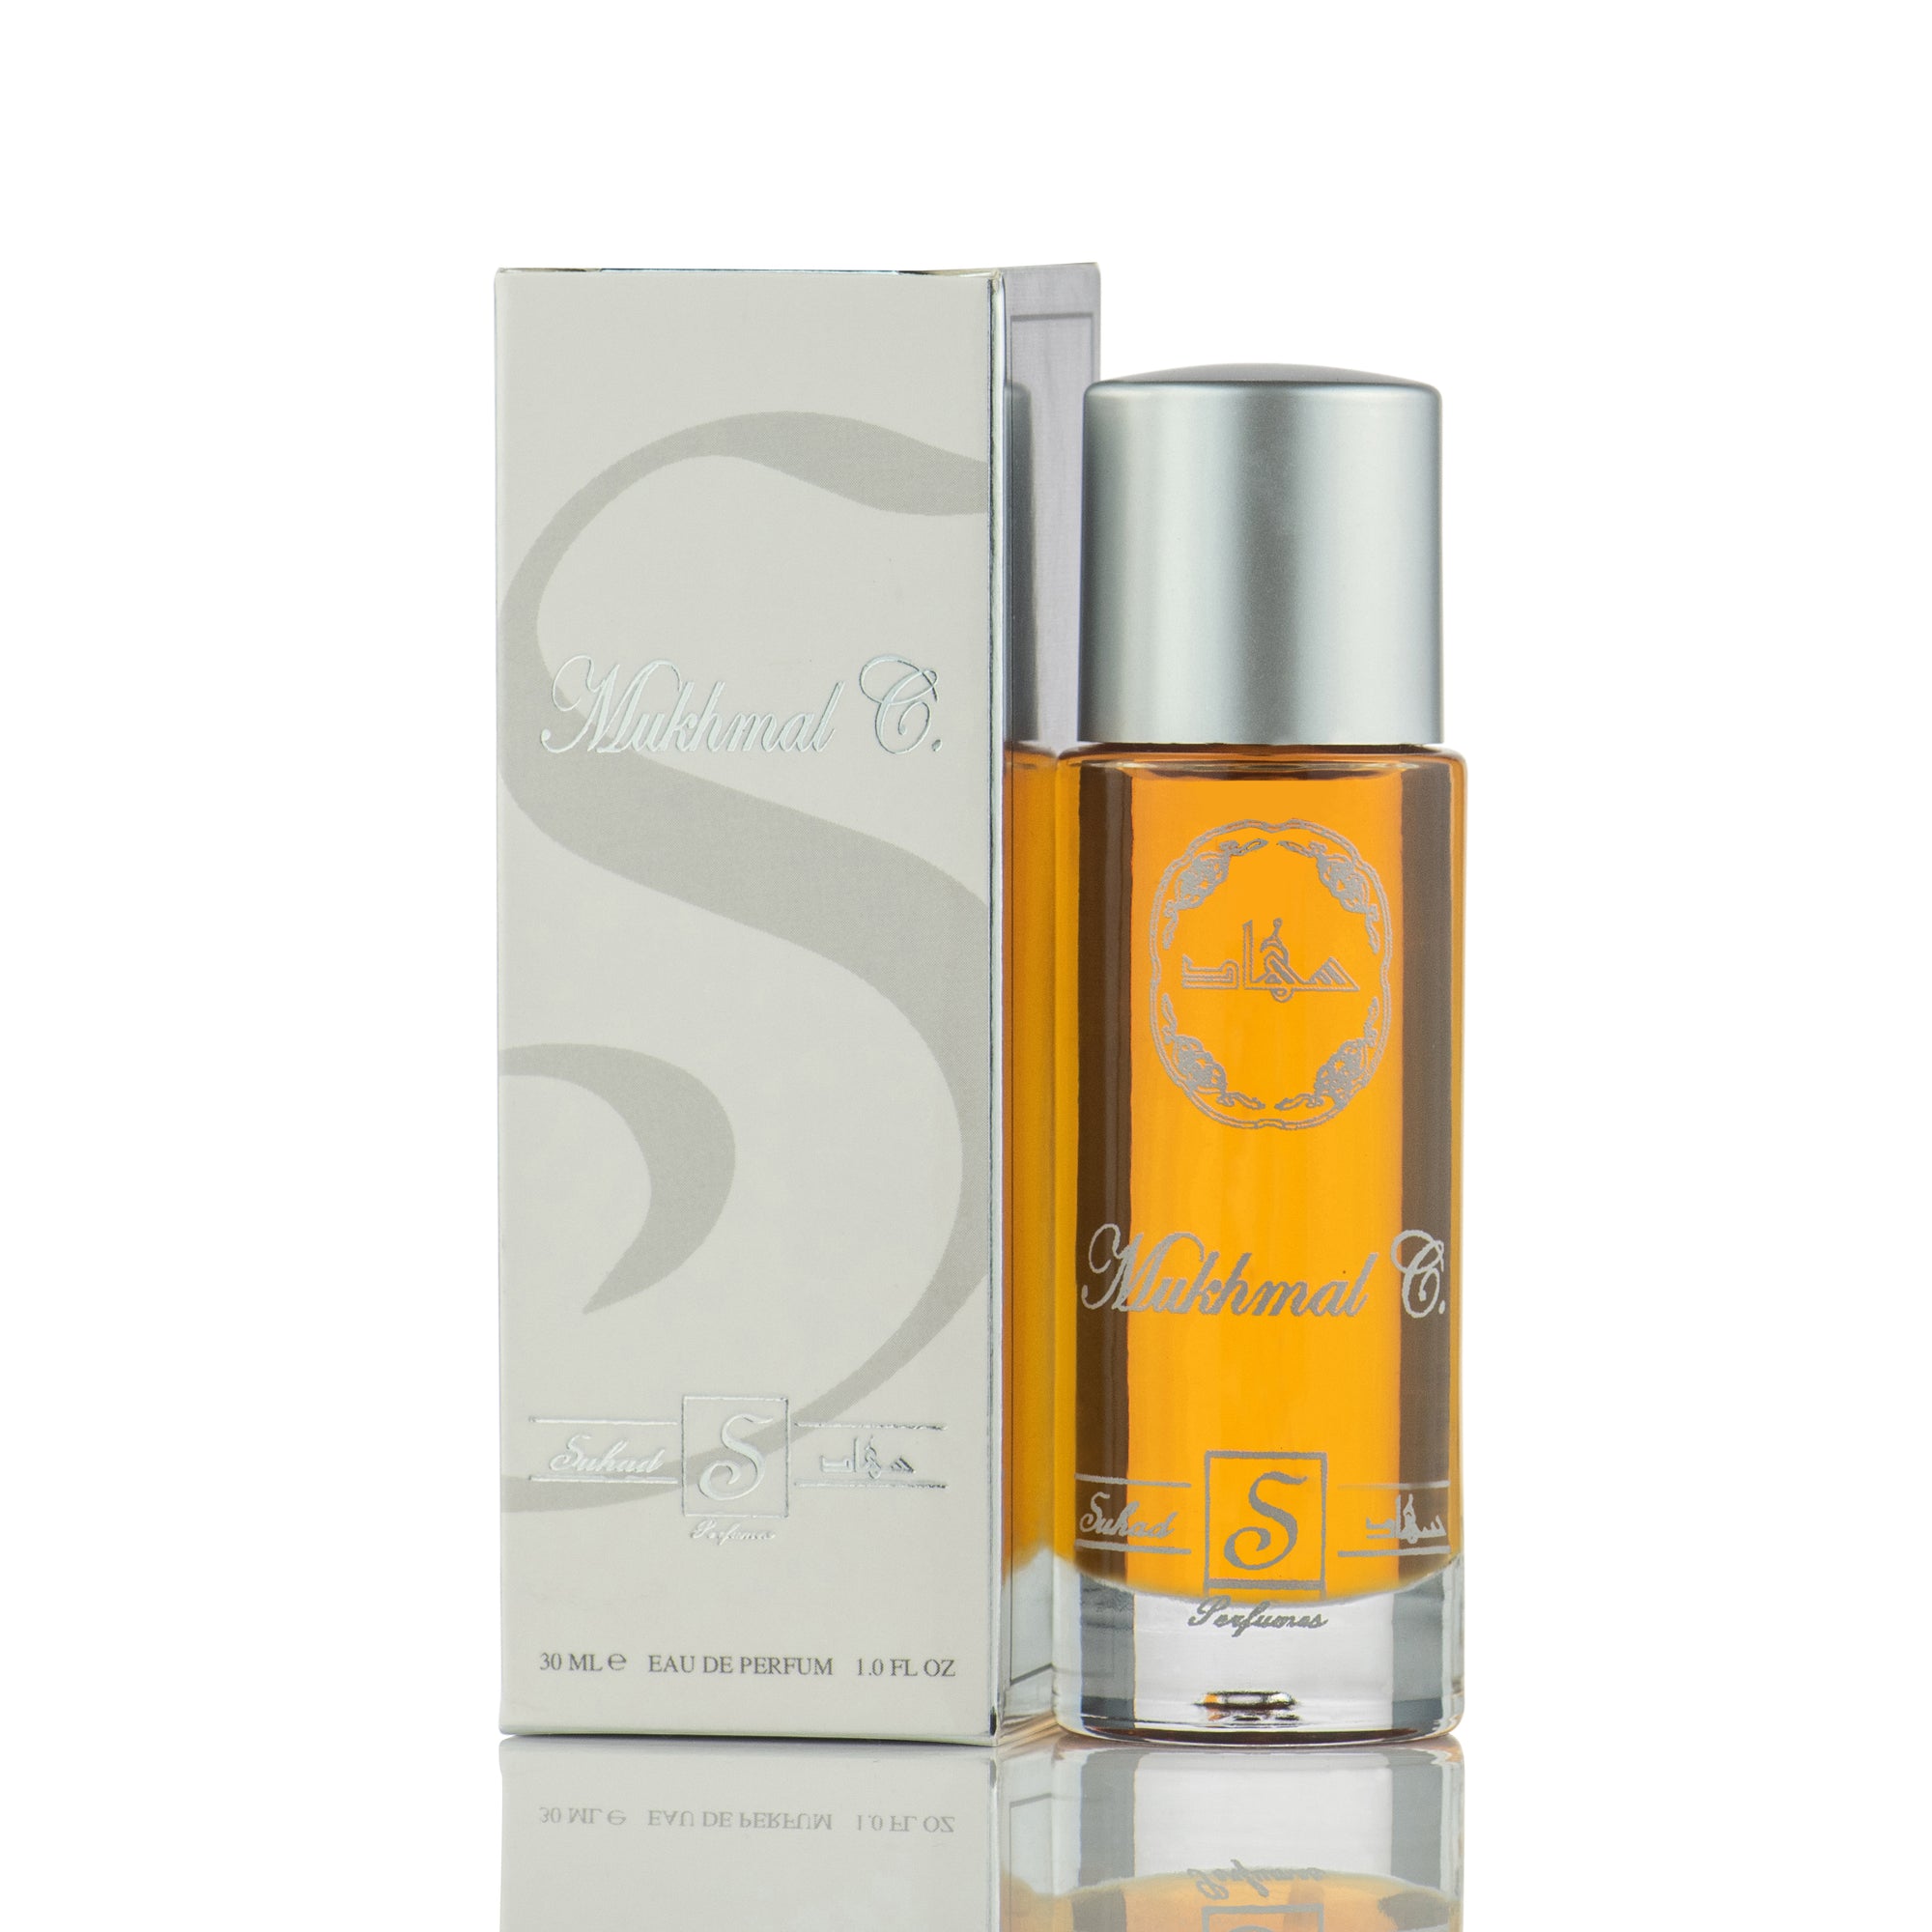 MUKHMAL C (CONCENTRATED BODY OIL) 30ML